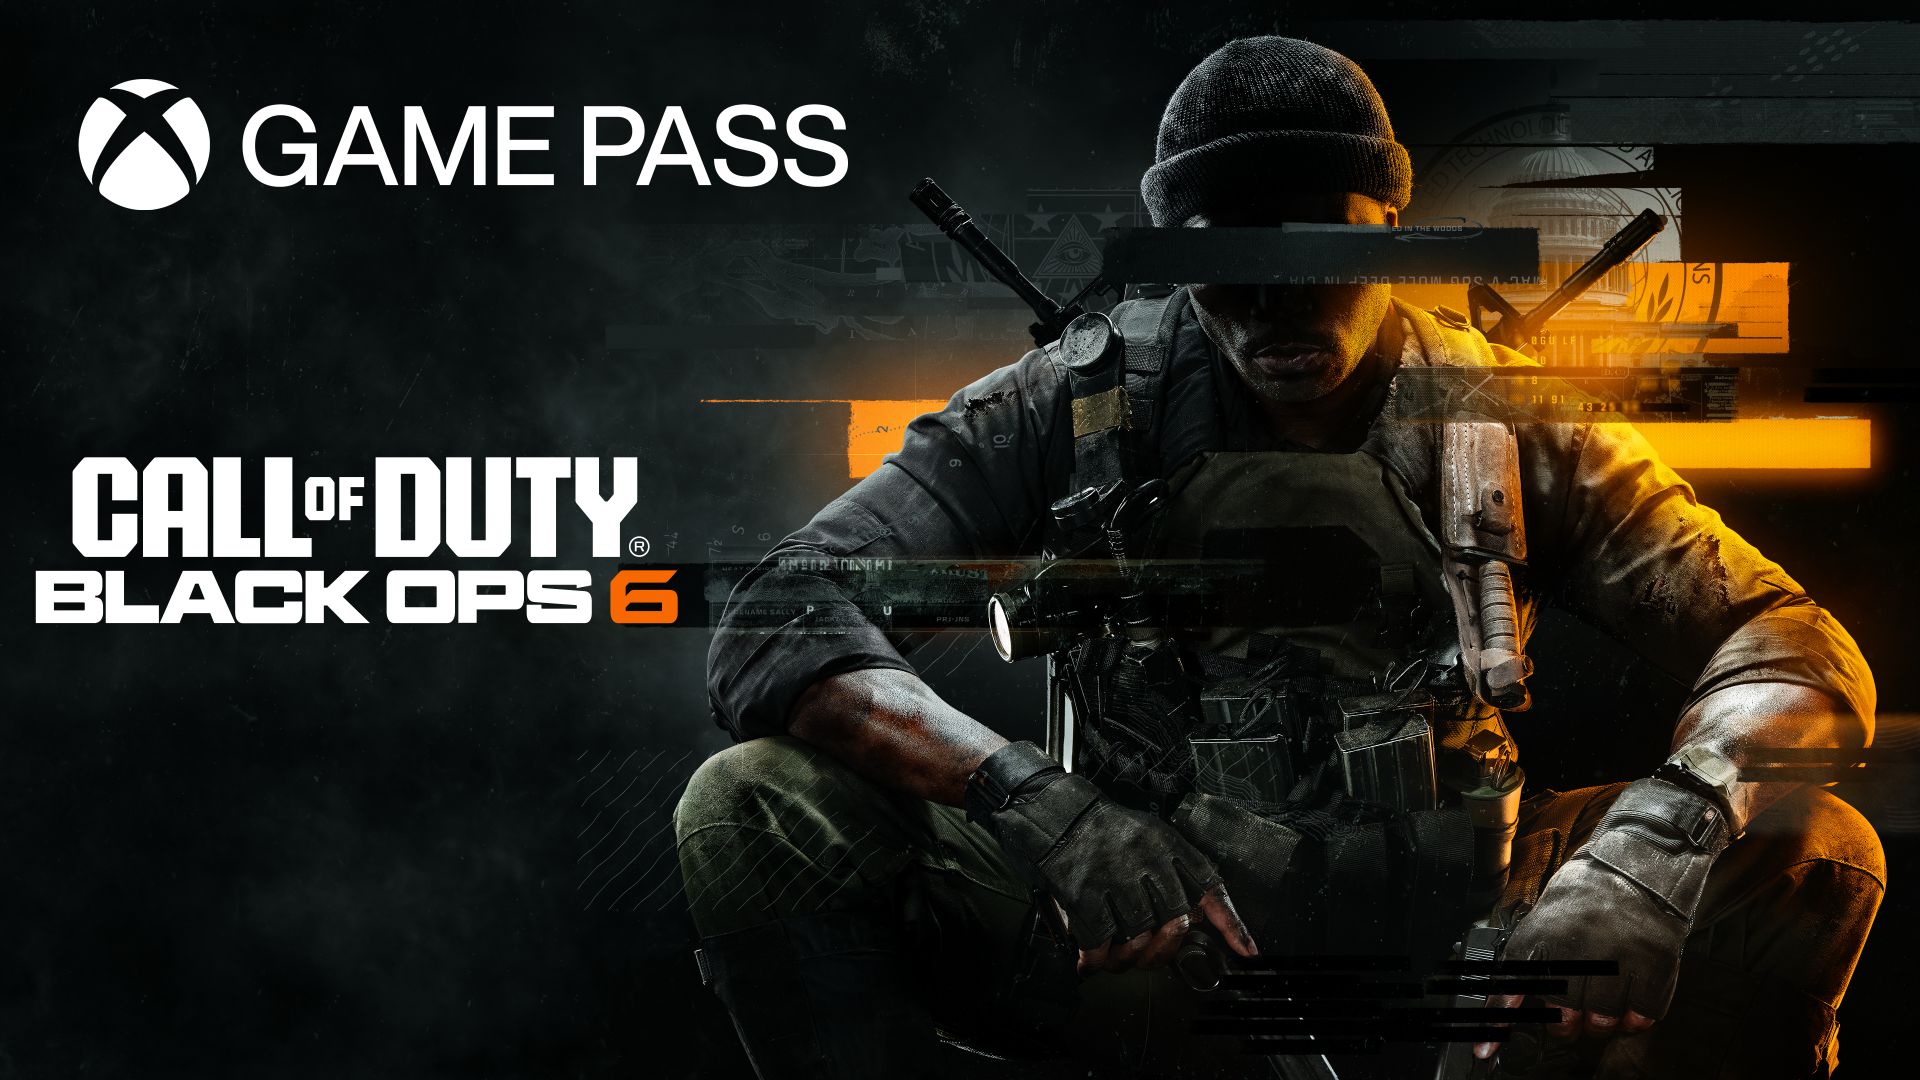 Call of Duty Black Ops 6 will be available on Xbox Game Pass from the